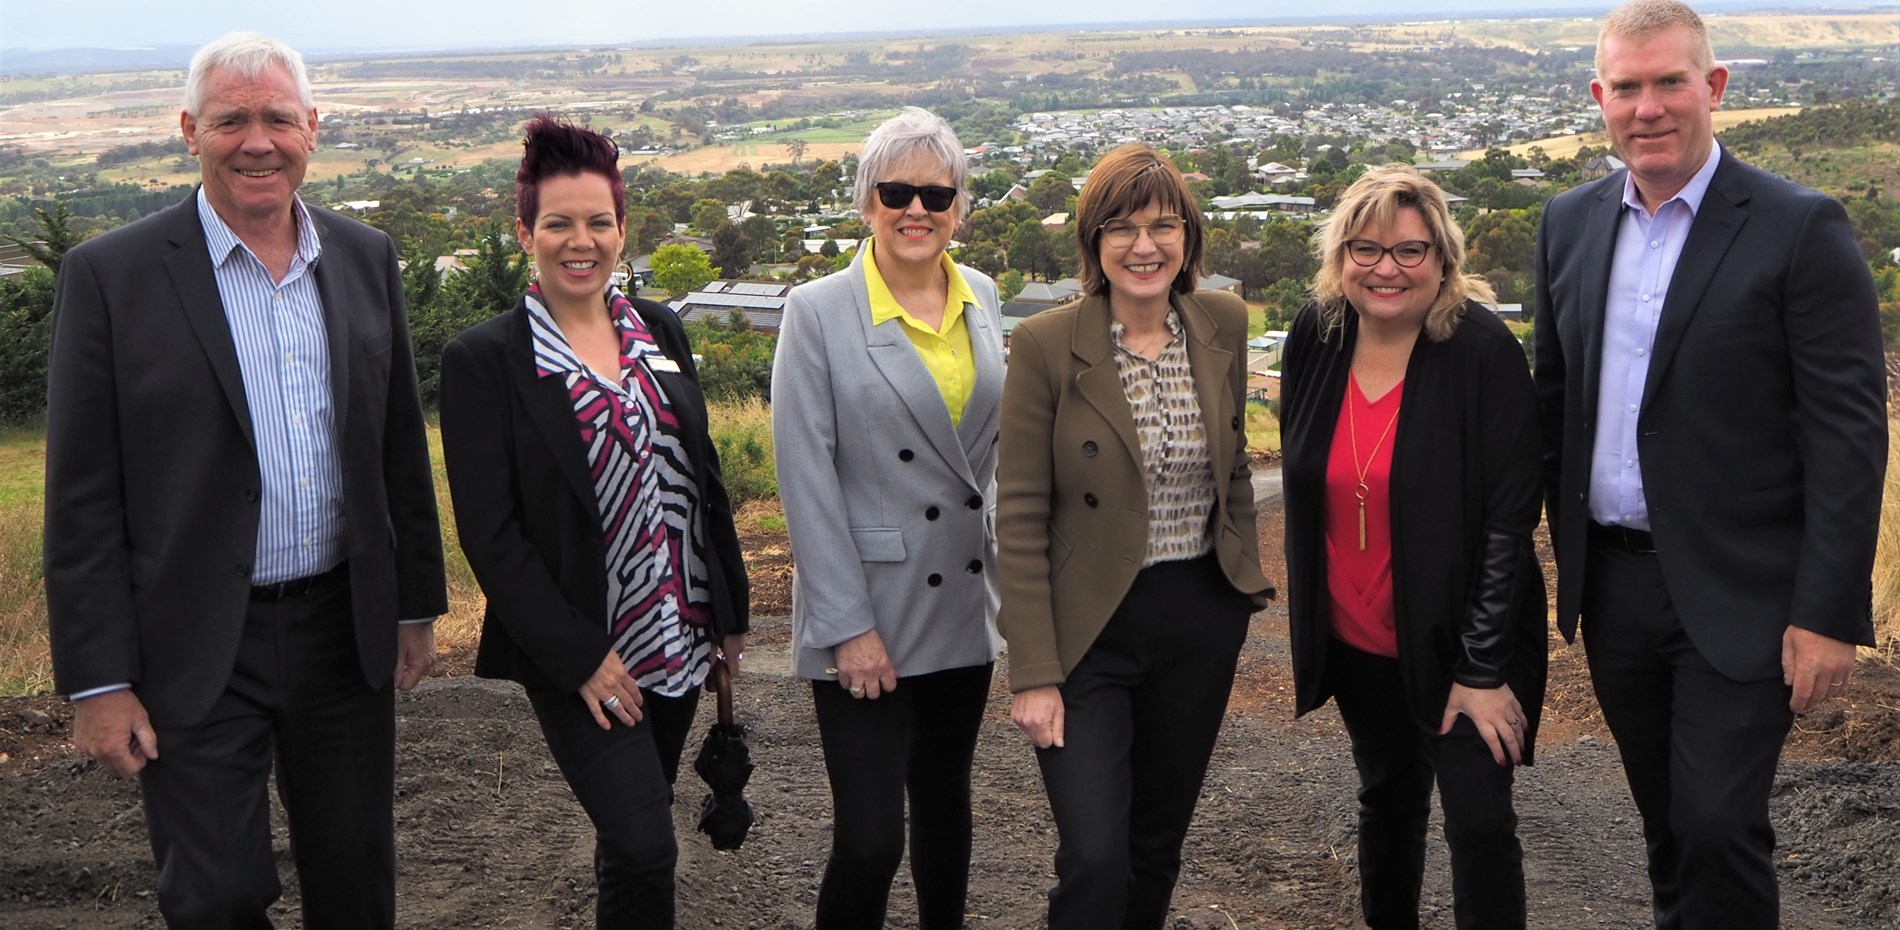 BACCHUS MARSH REACHES NEW HEIGHTS TO ATTRACT TOURISTS Main Image